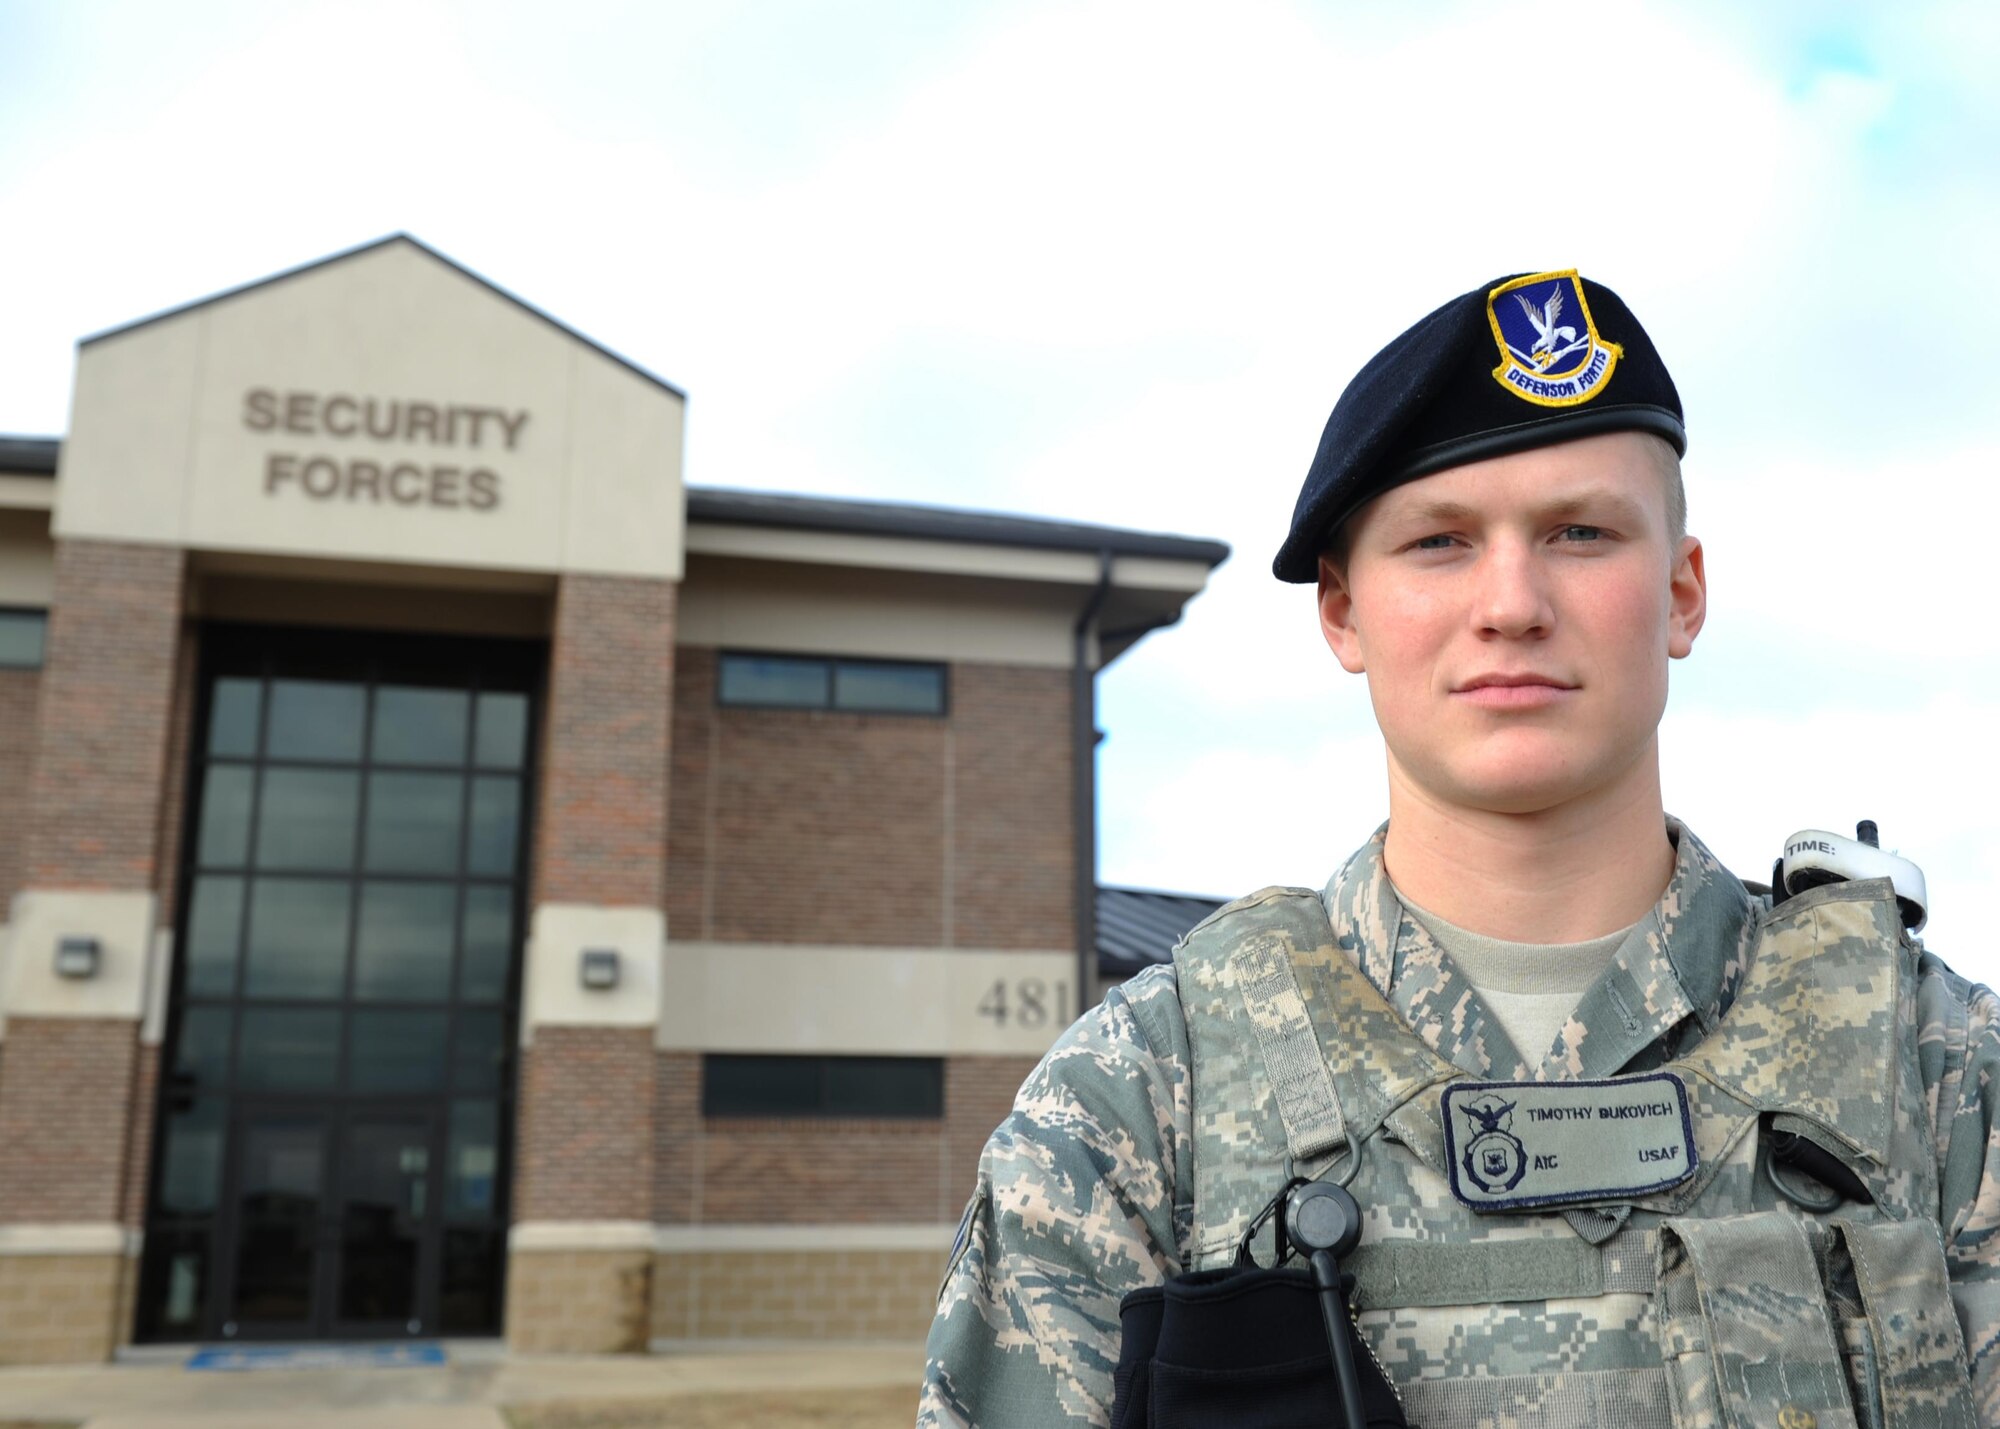 U.S. Air Force Airman 1st Class Timothy Bukovich, 19th Security Forces Squadron pass and registration clerk, was nominated as Combat Airlifter of the Week Dec. 12, 2016, at Little Rock Air Force Base, Ark. Bukovich strives to put others before himself while letting the core values of the Air Force shine through his actions and beliefs, not only in the workplace, but in his everyday life as well. (U.S. Air Force photo by Airman 1st Class Grace Nichols)